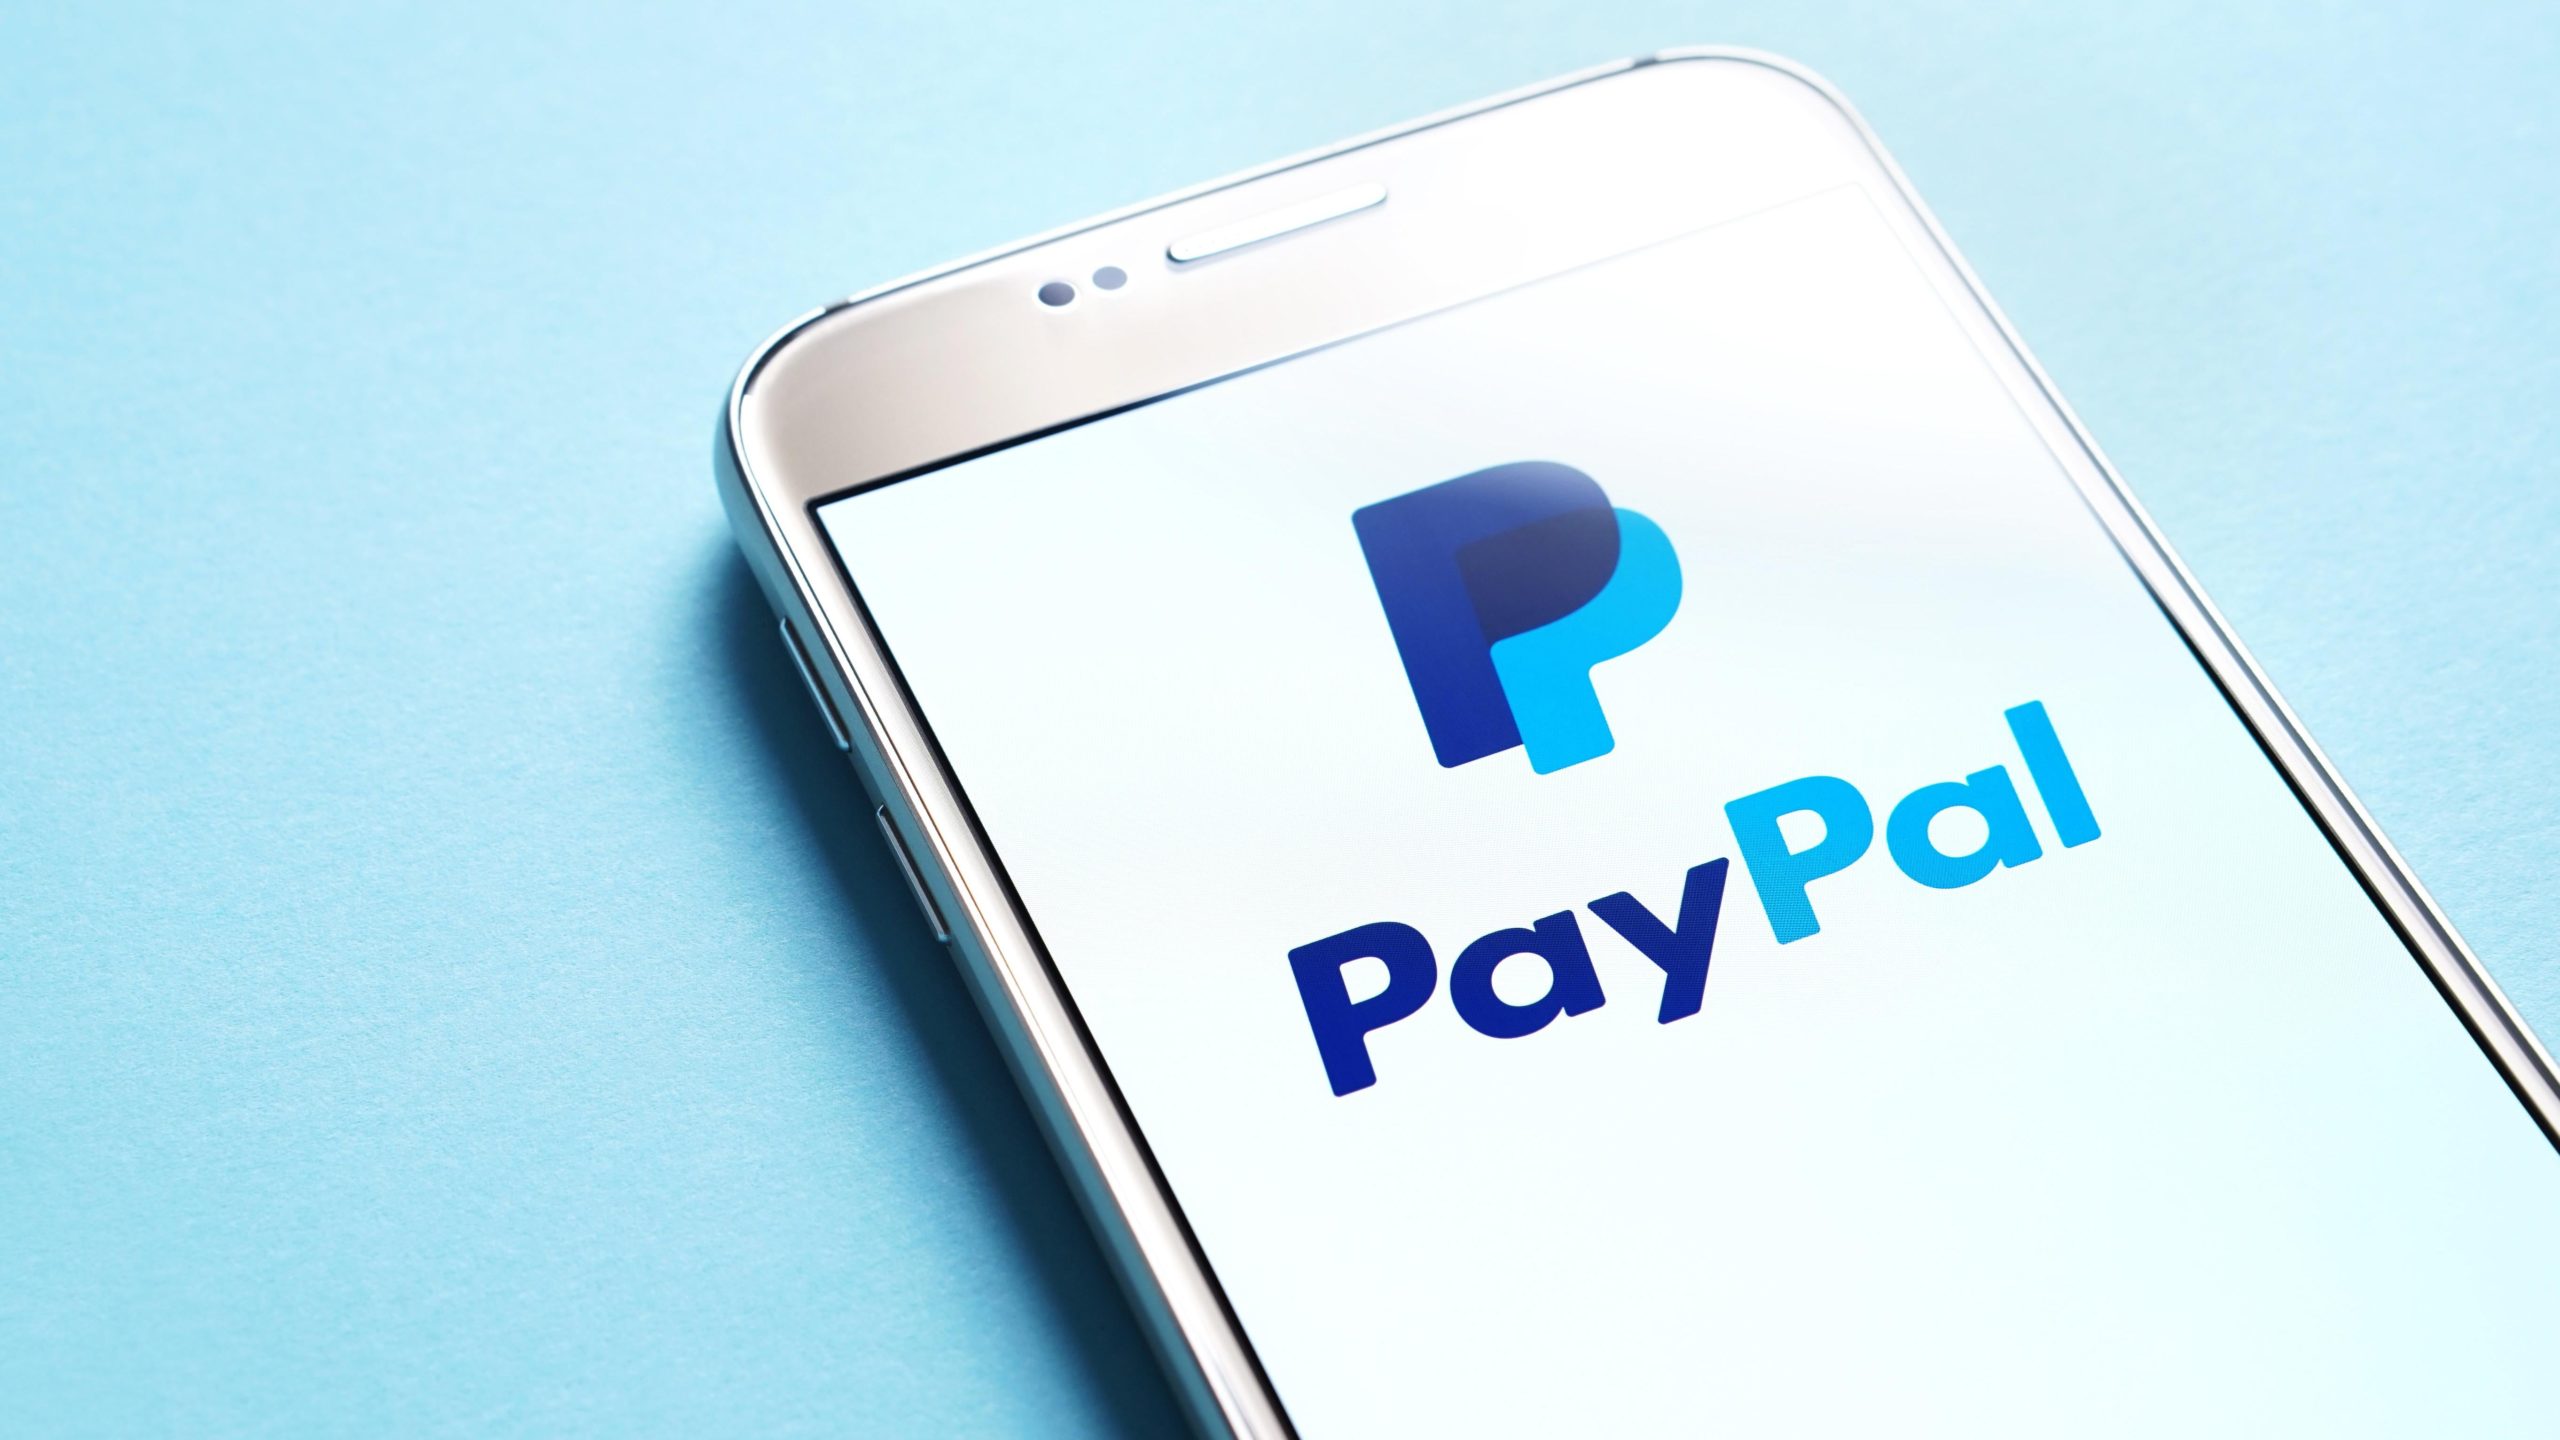 Is PayPay’s ‘Buy New Pay Later’ Instalment Plan Worth It?